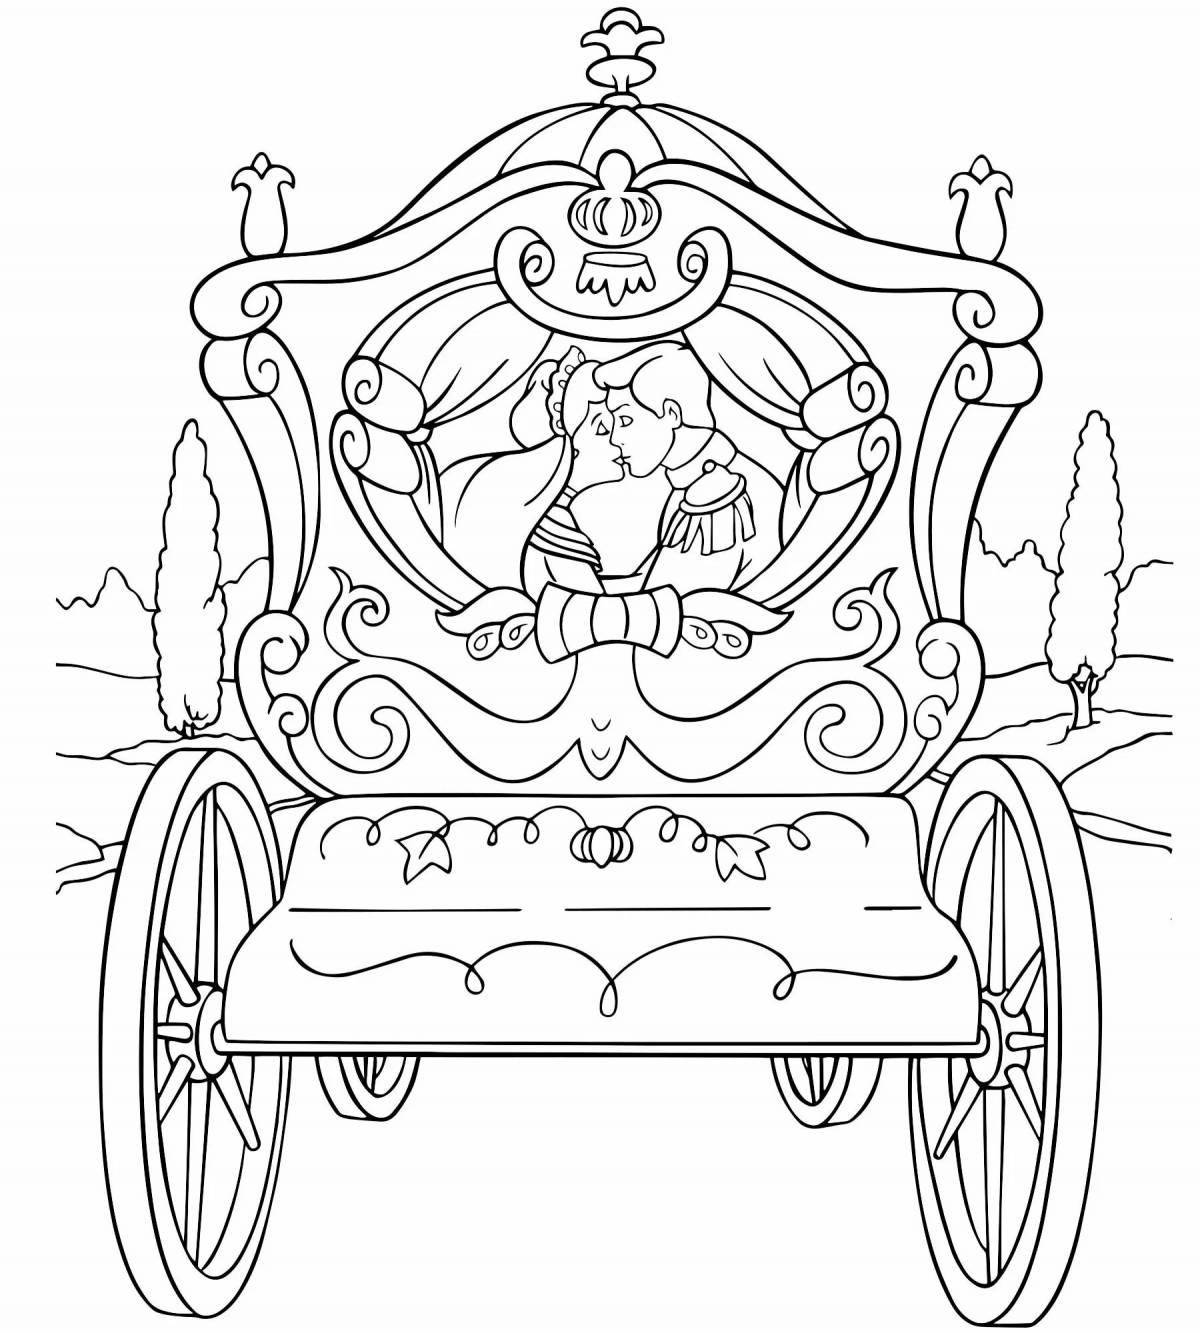 Coloring page nice princess in carriage